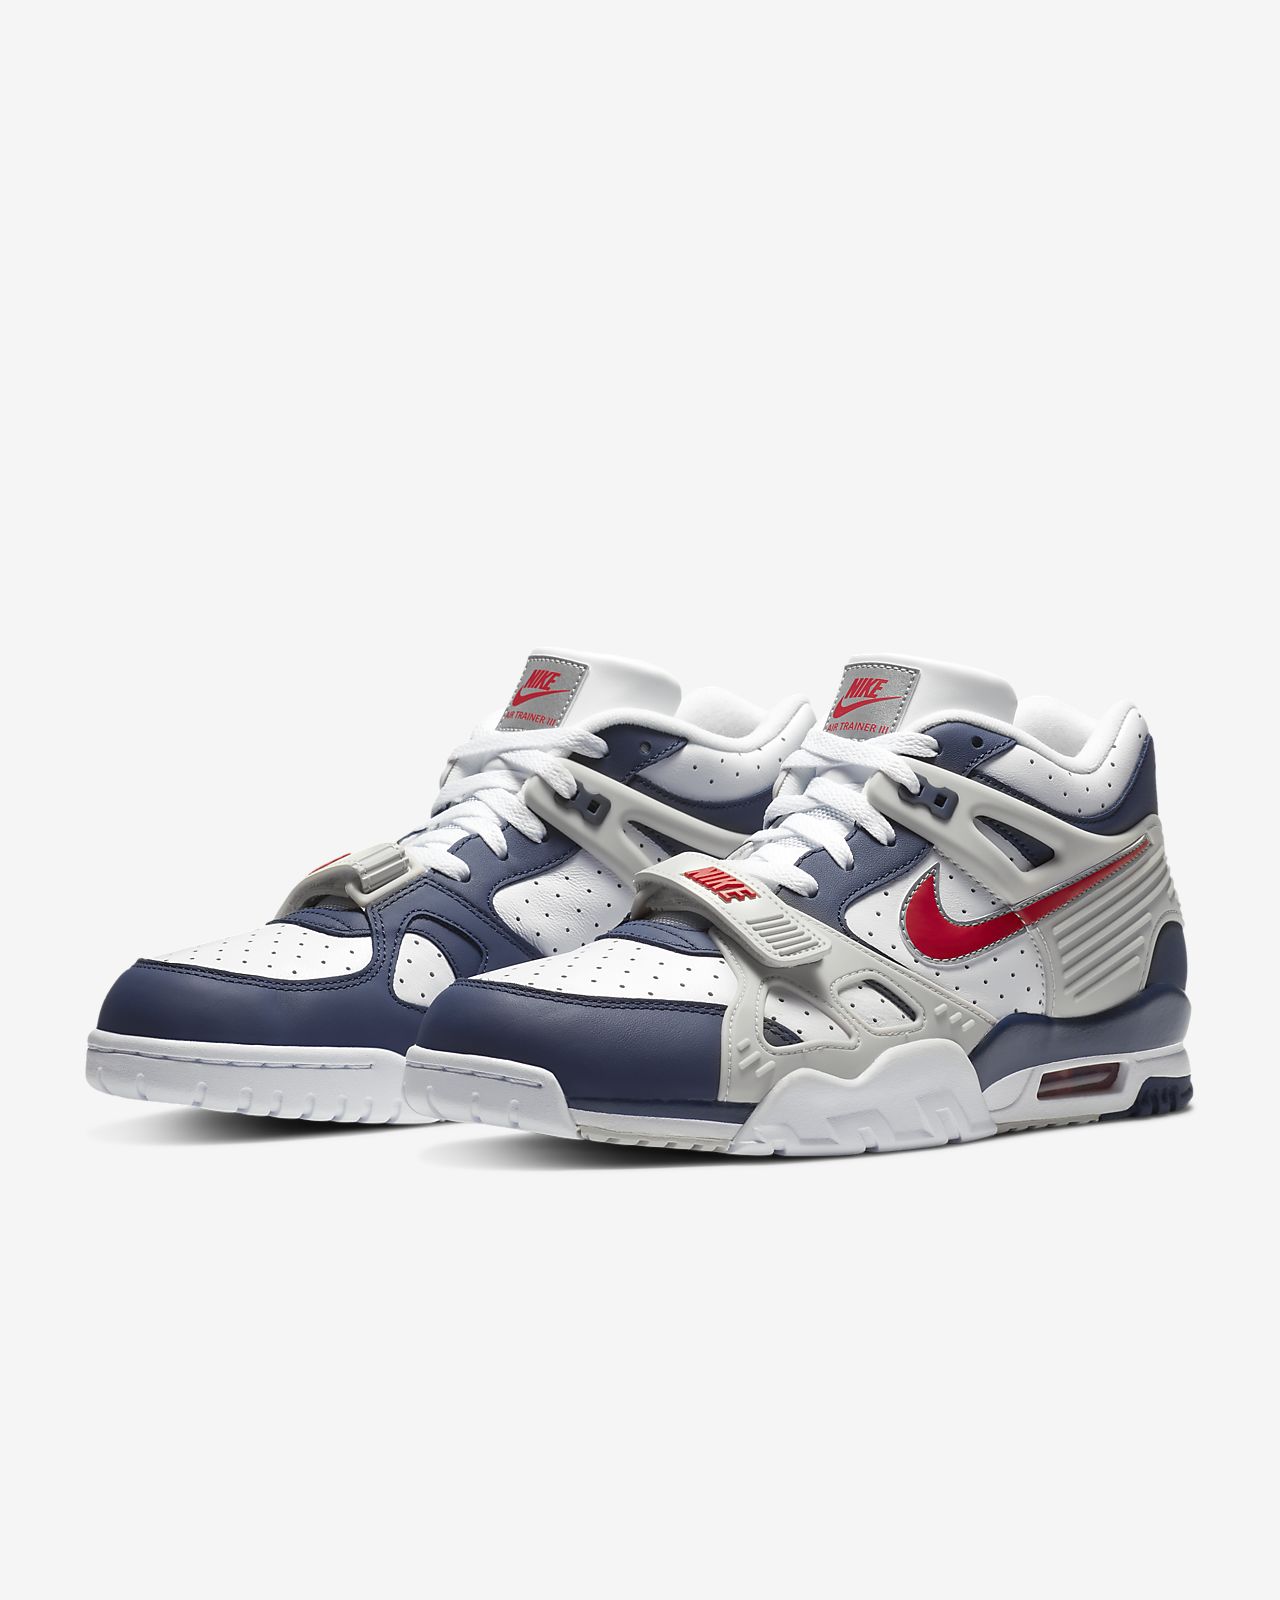 Nike Air Trainer 3 | SNKRS WORLD